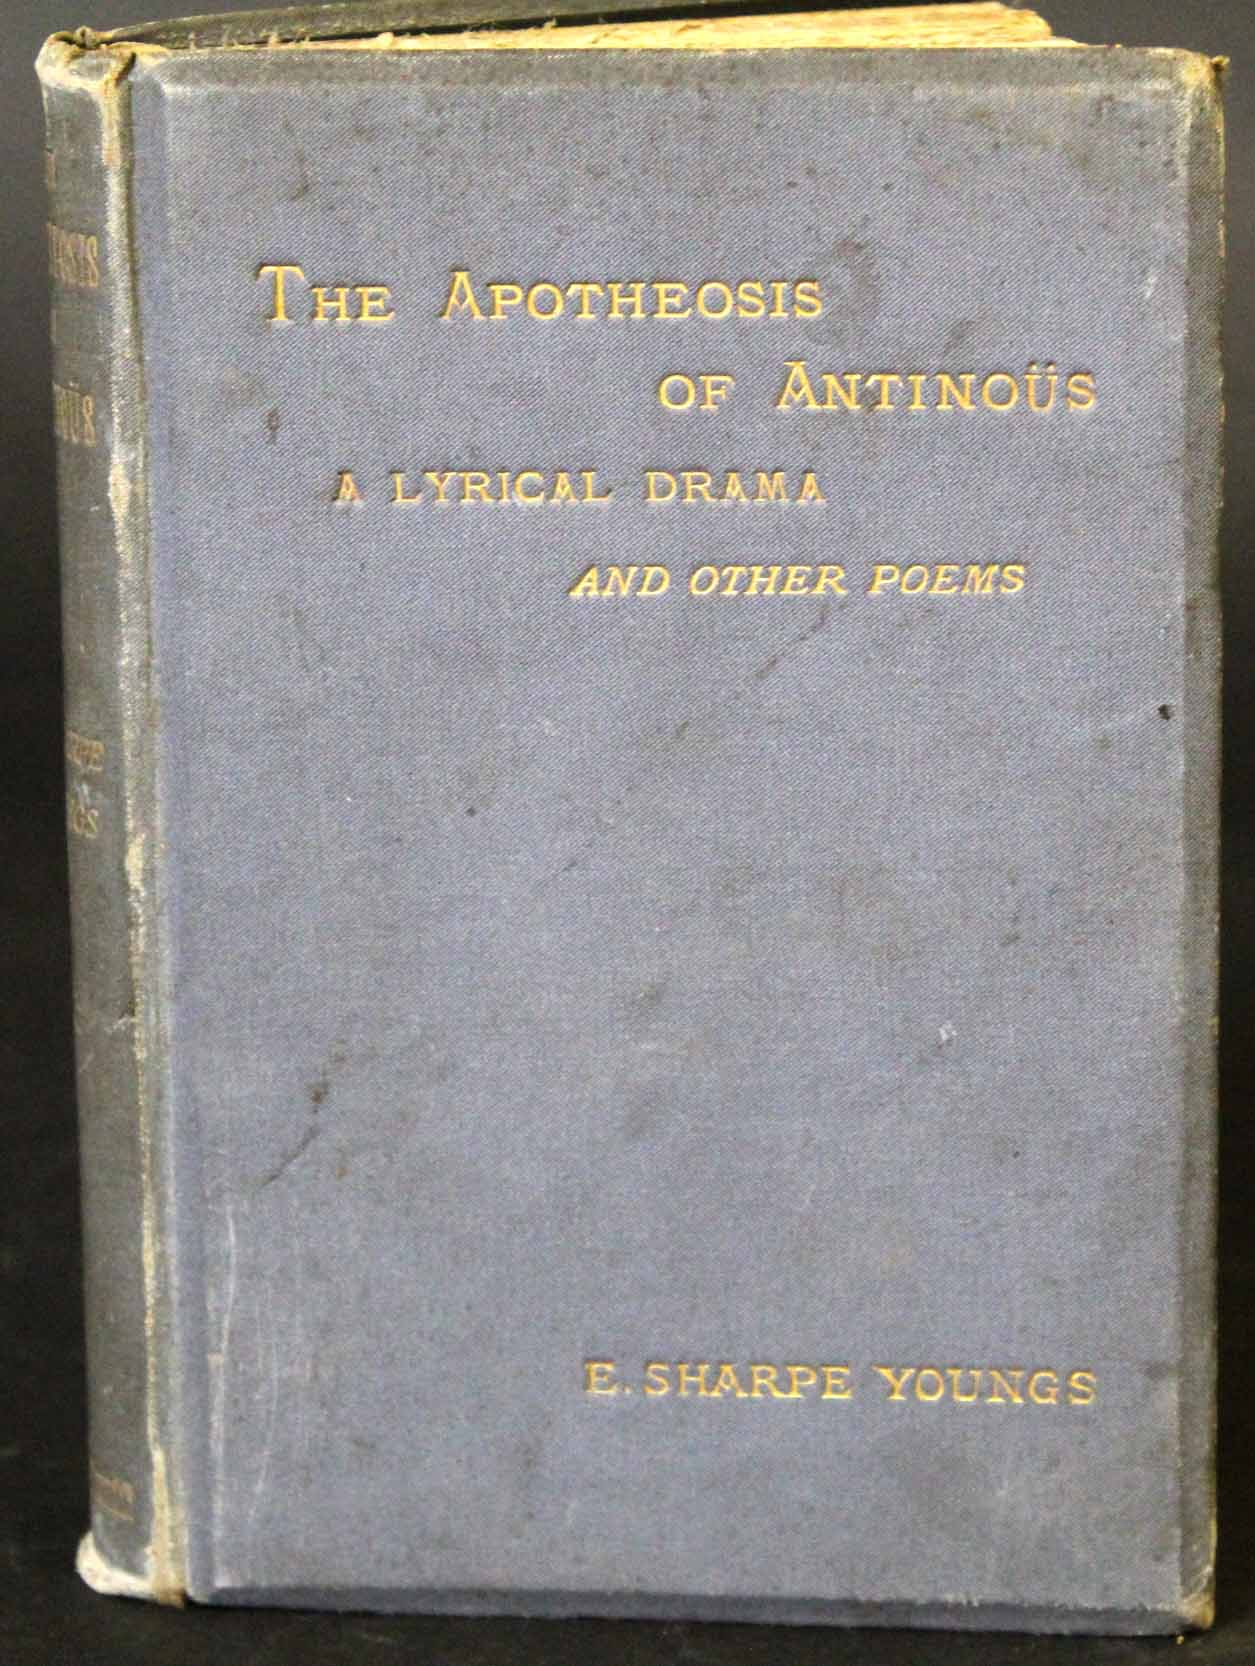 ELLA SHARPE YOUNGS: THE APOTHEOSIS OF ANTINOUS AND OTHER POEMS, London, Keegan Paul Trench & Co, - Image 2 of 2